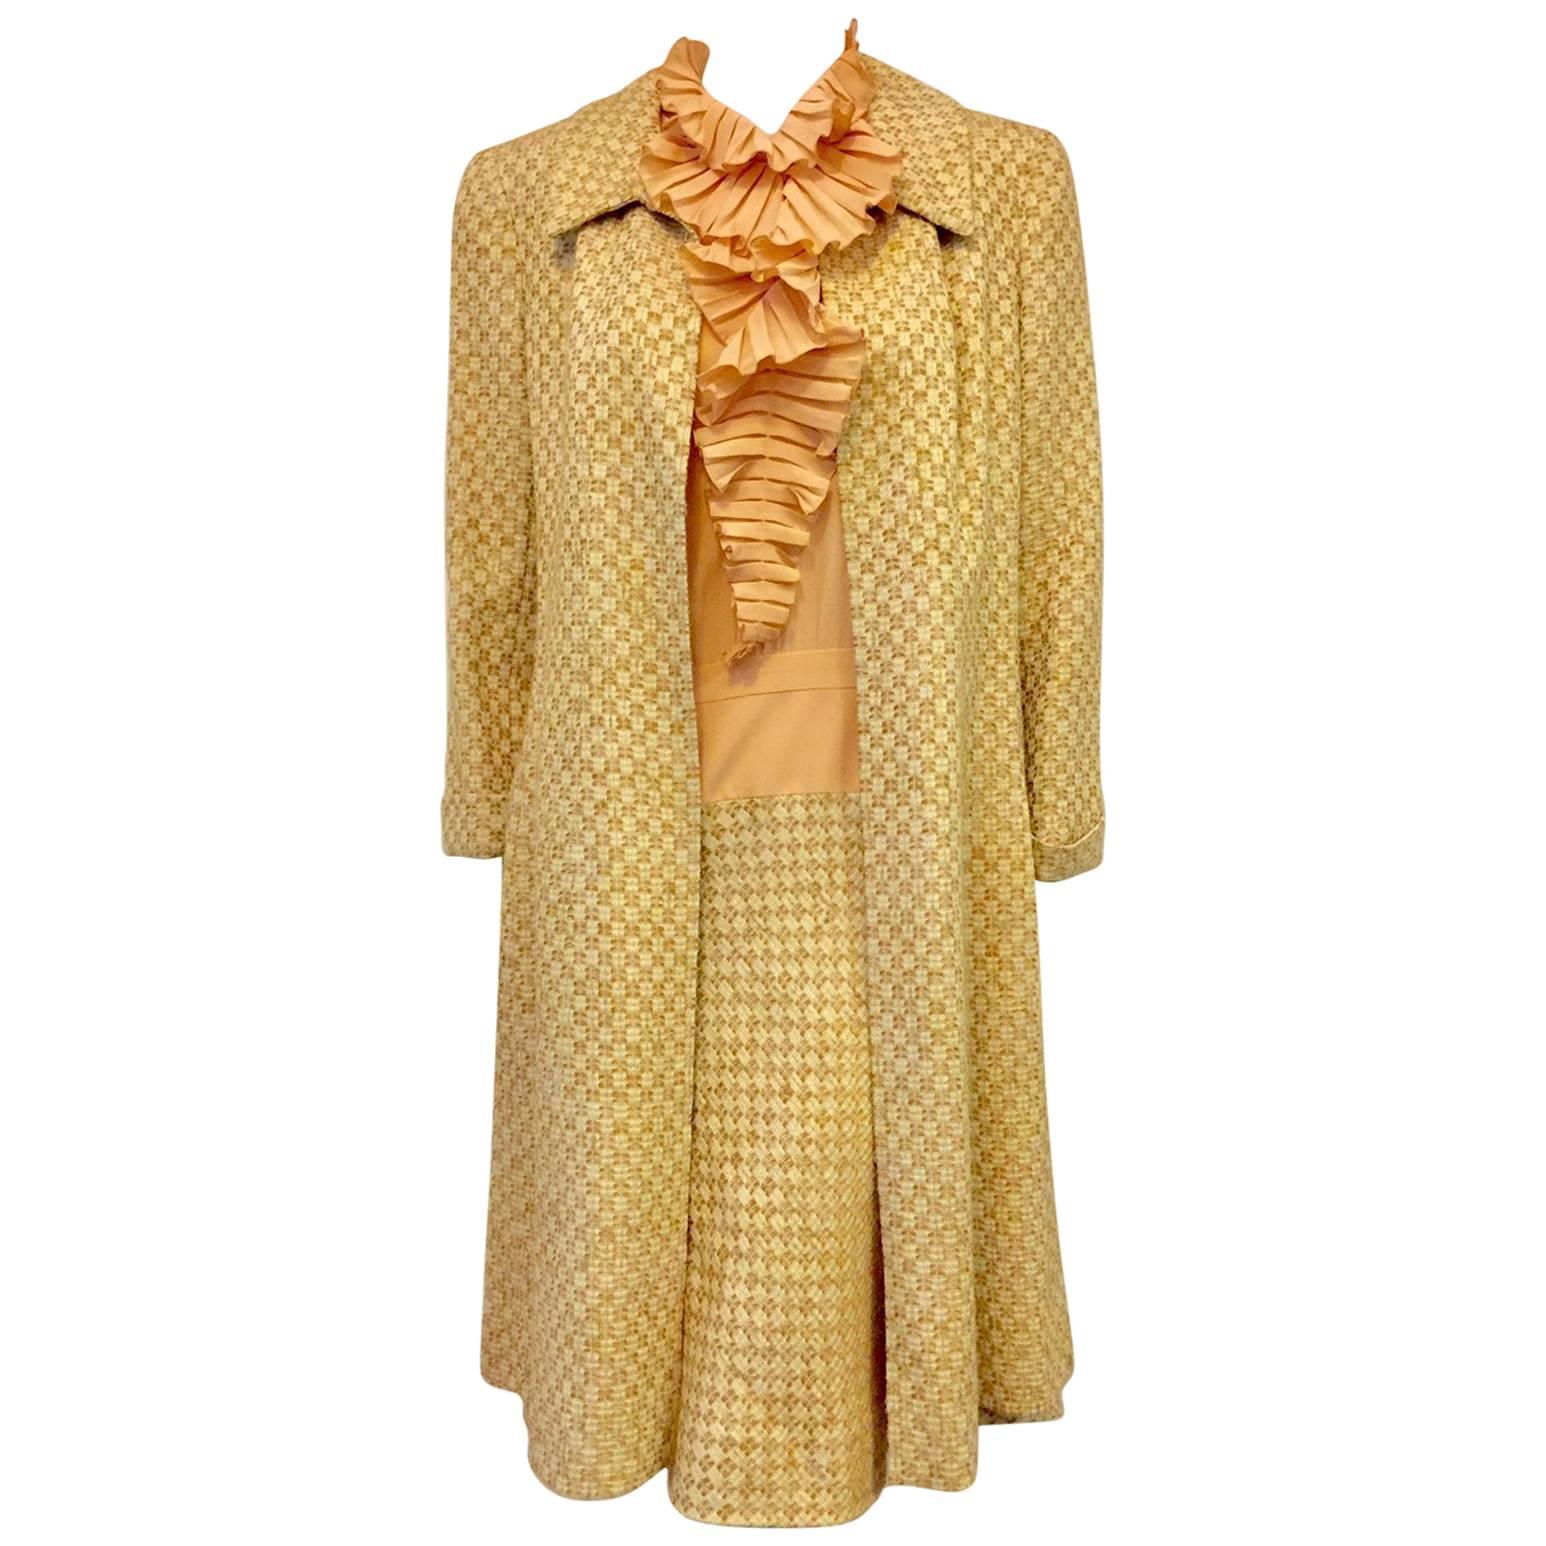 Chanel 2001 Cruise Honey and Tan Tweed Dress and Coat Ensemble